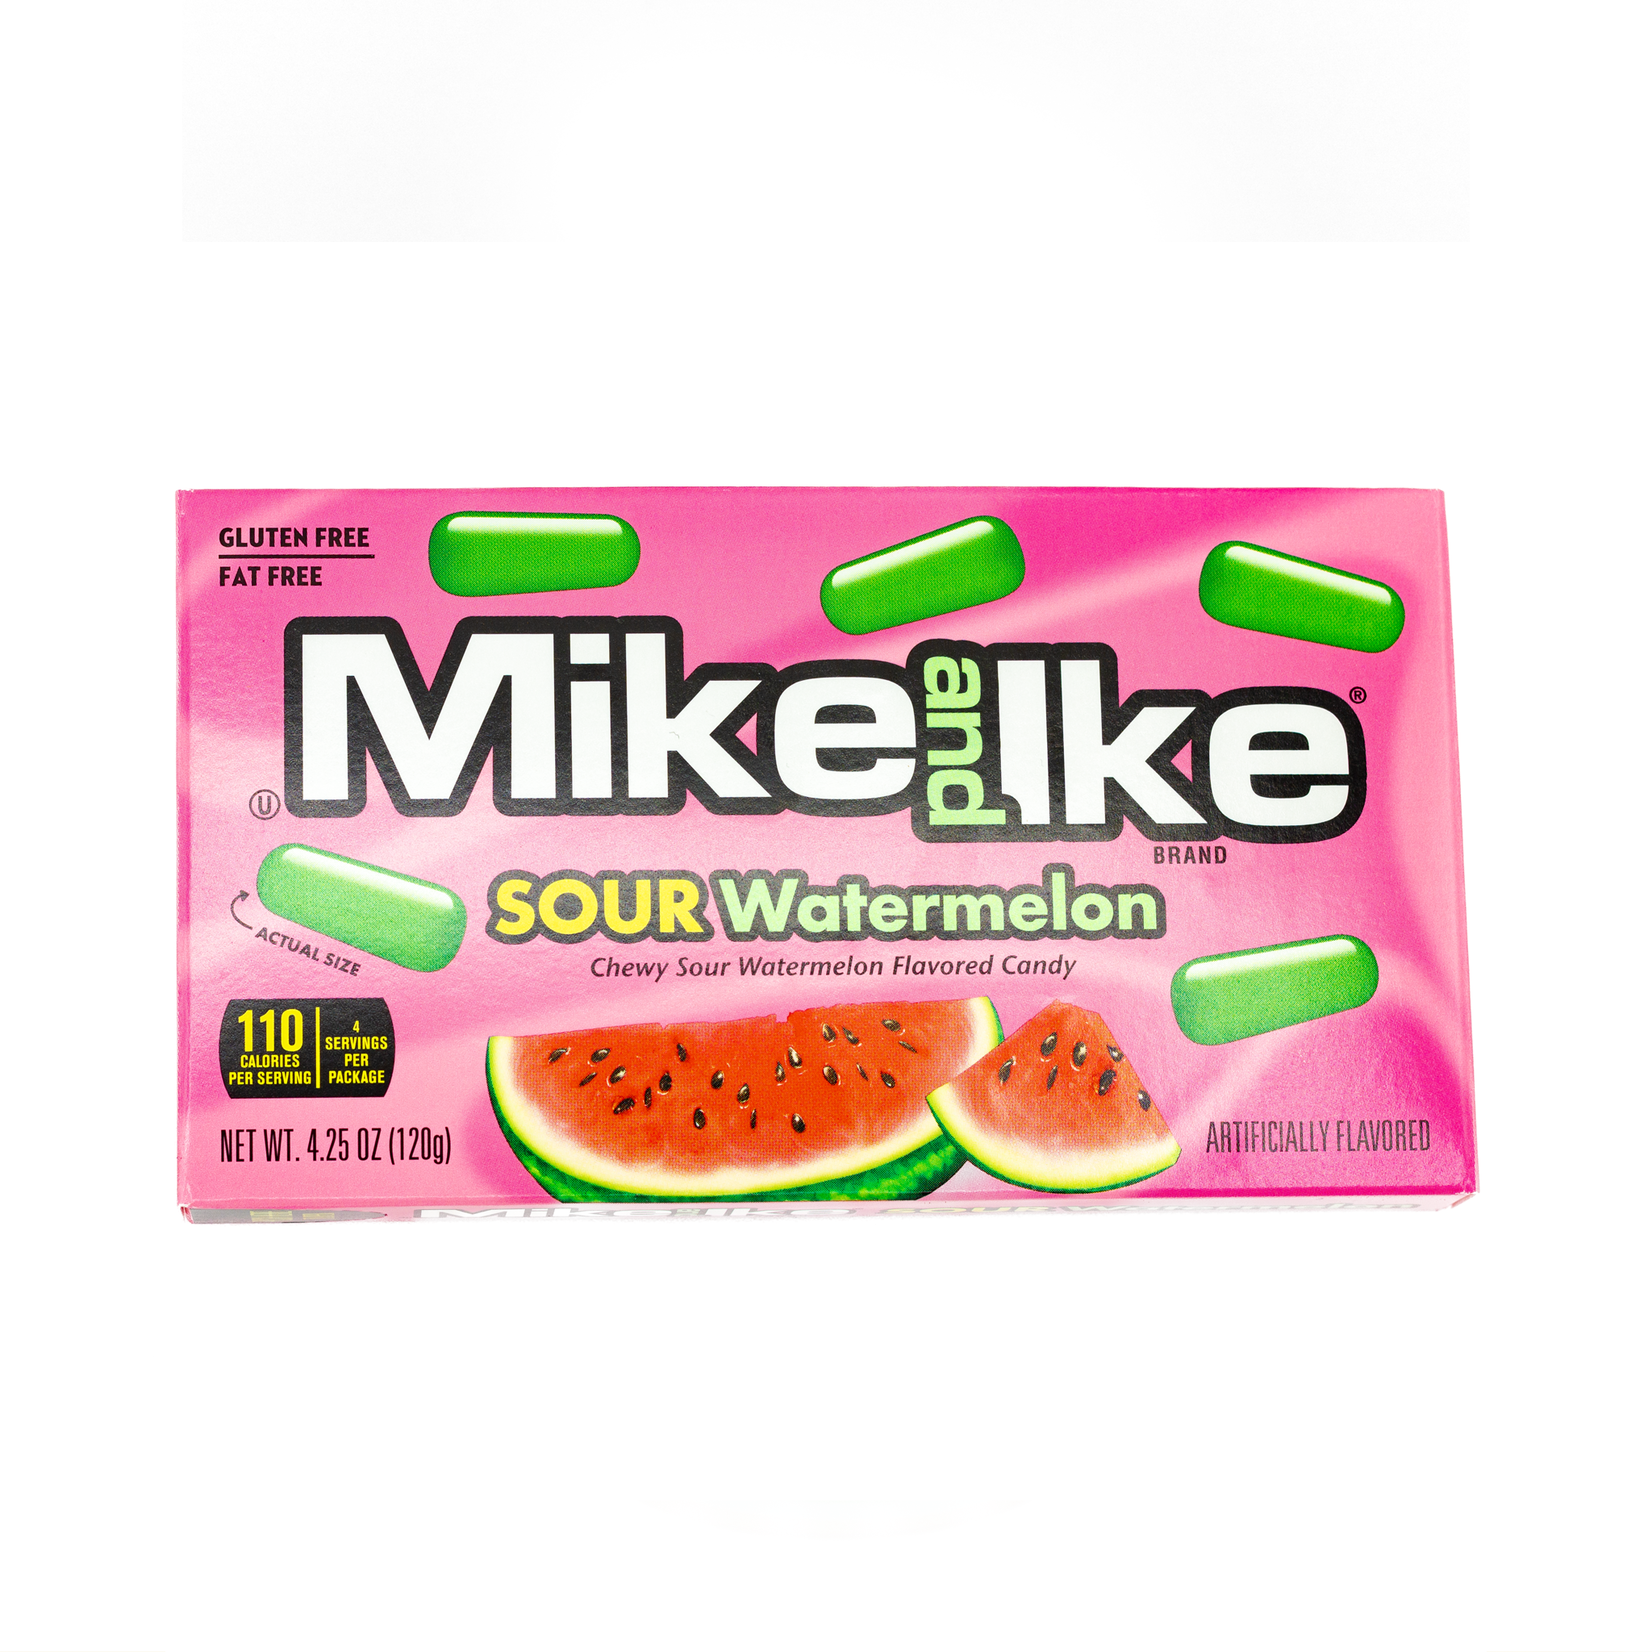 Mike & ike sour watermelon 120g